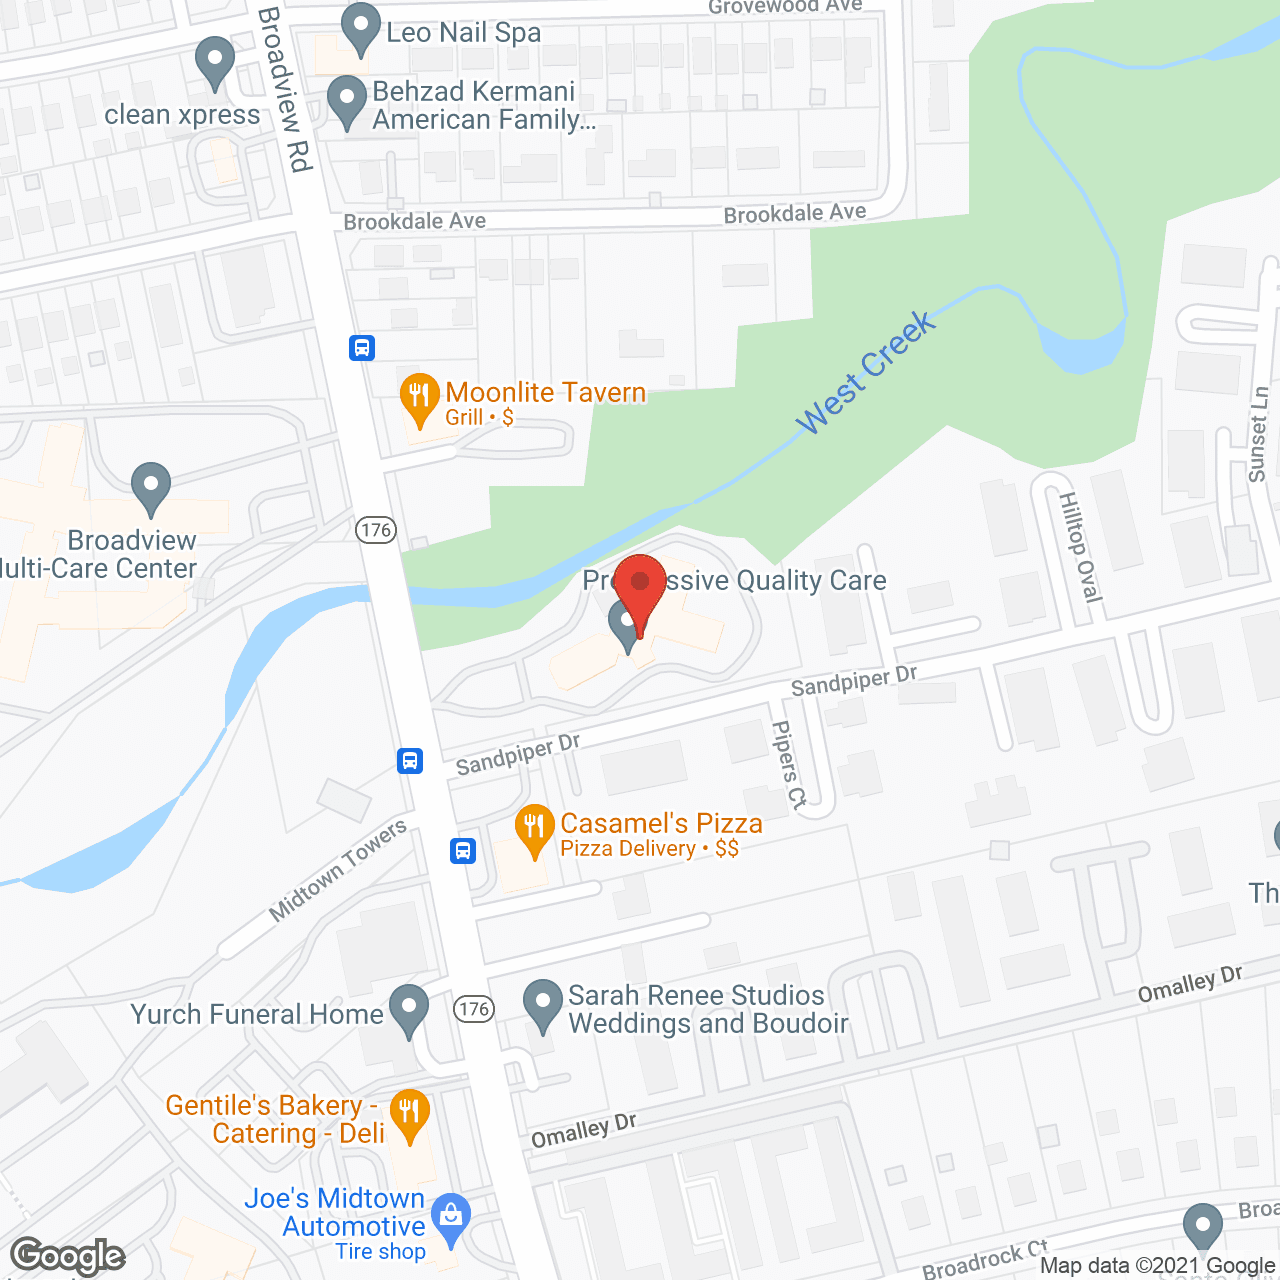 Parma Care Ctr in google map